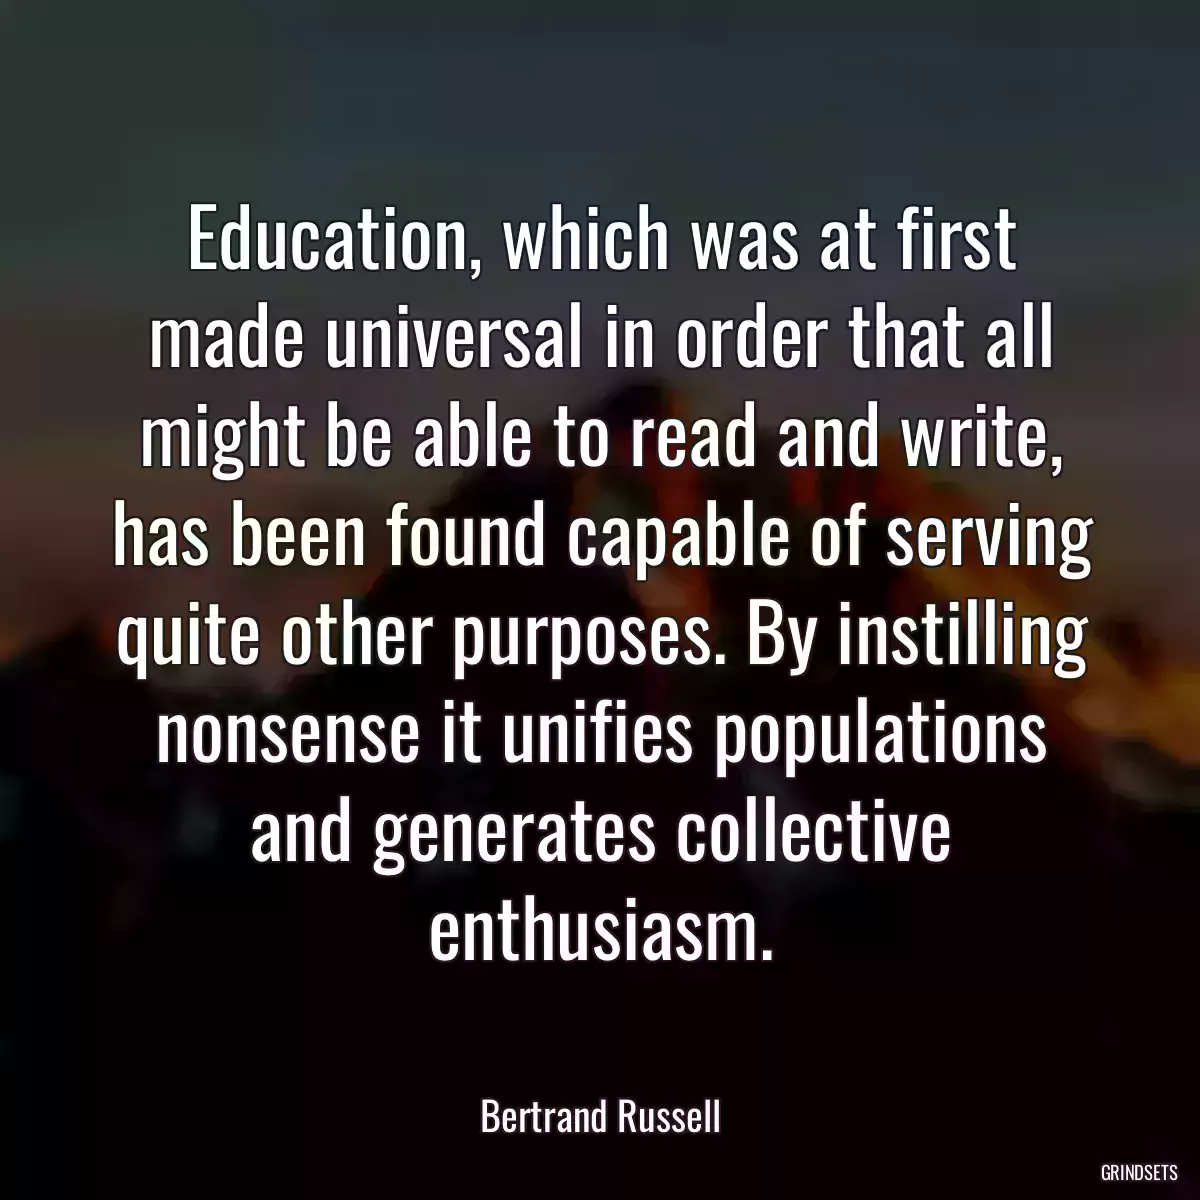 Education, which was at first made universal in order that all might be able to read and write, has been found capable of serving quite other purposes. By instilling nonsense it unifies populations and generates collective enthusiasm.